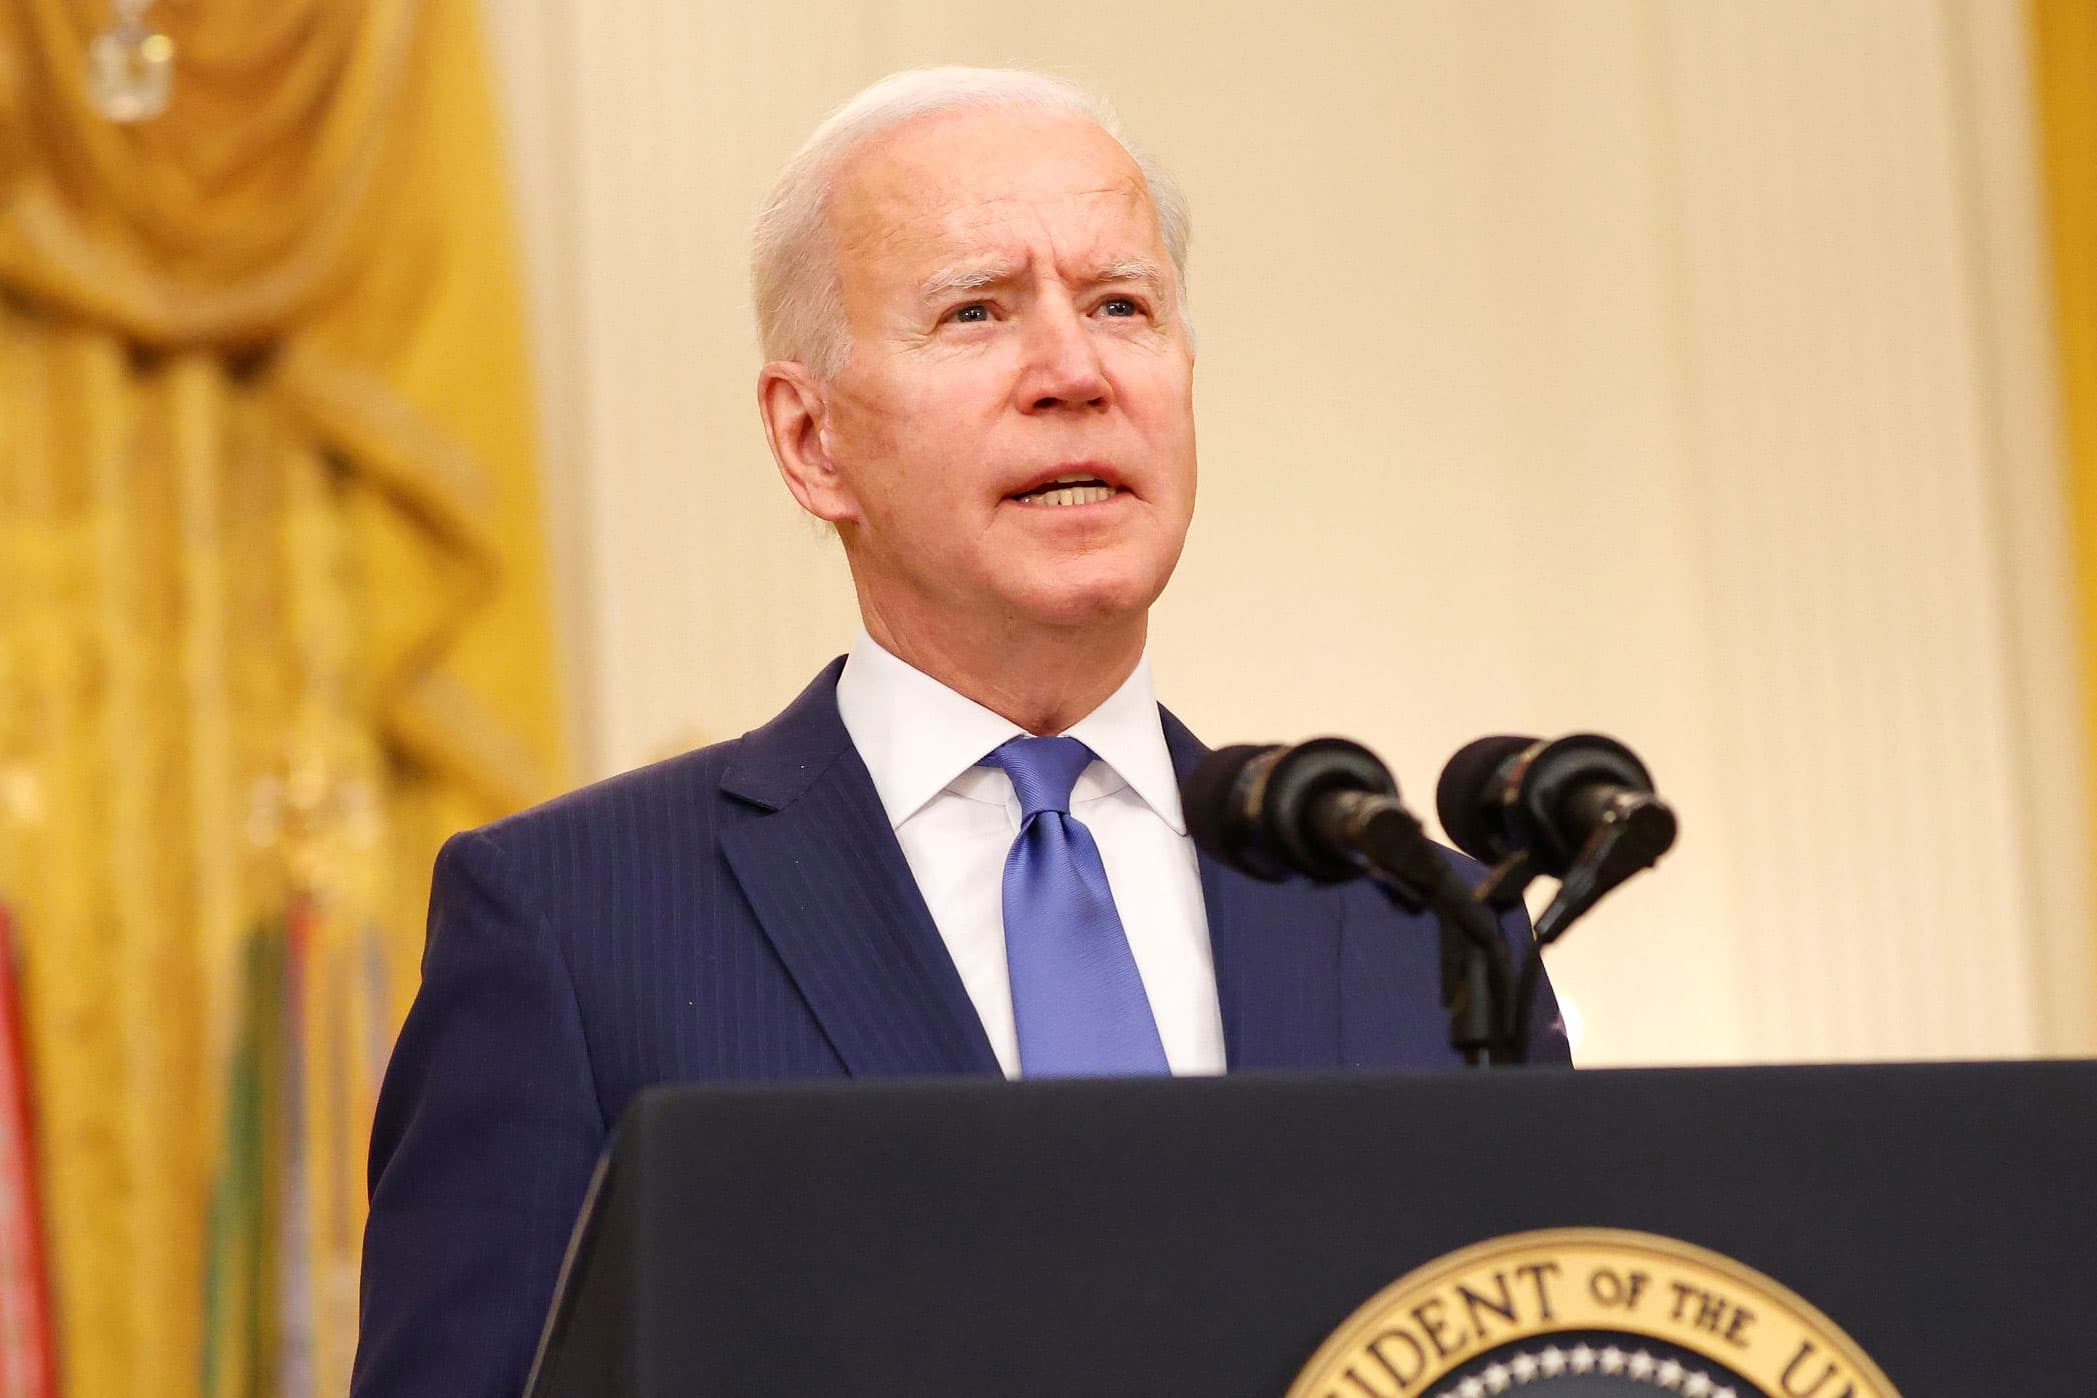 Biden Covid’s stimulus project boosts low-income Americans more than Trump tax cuts